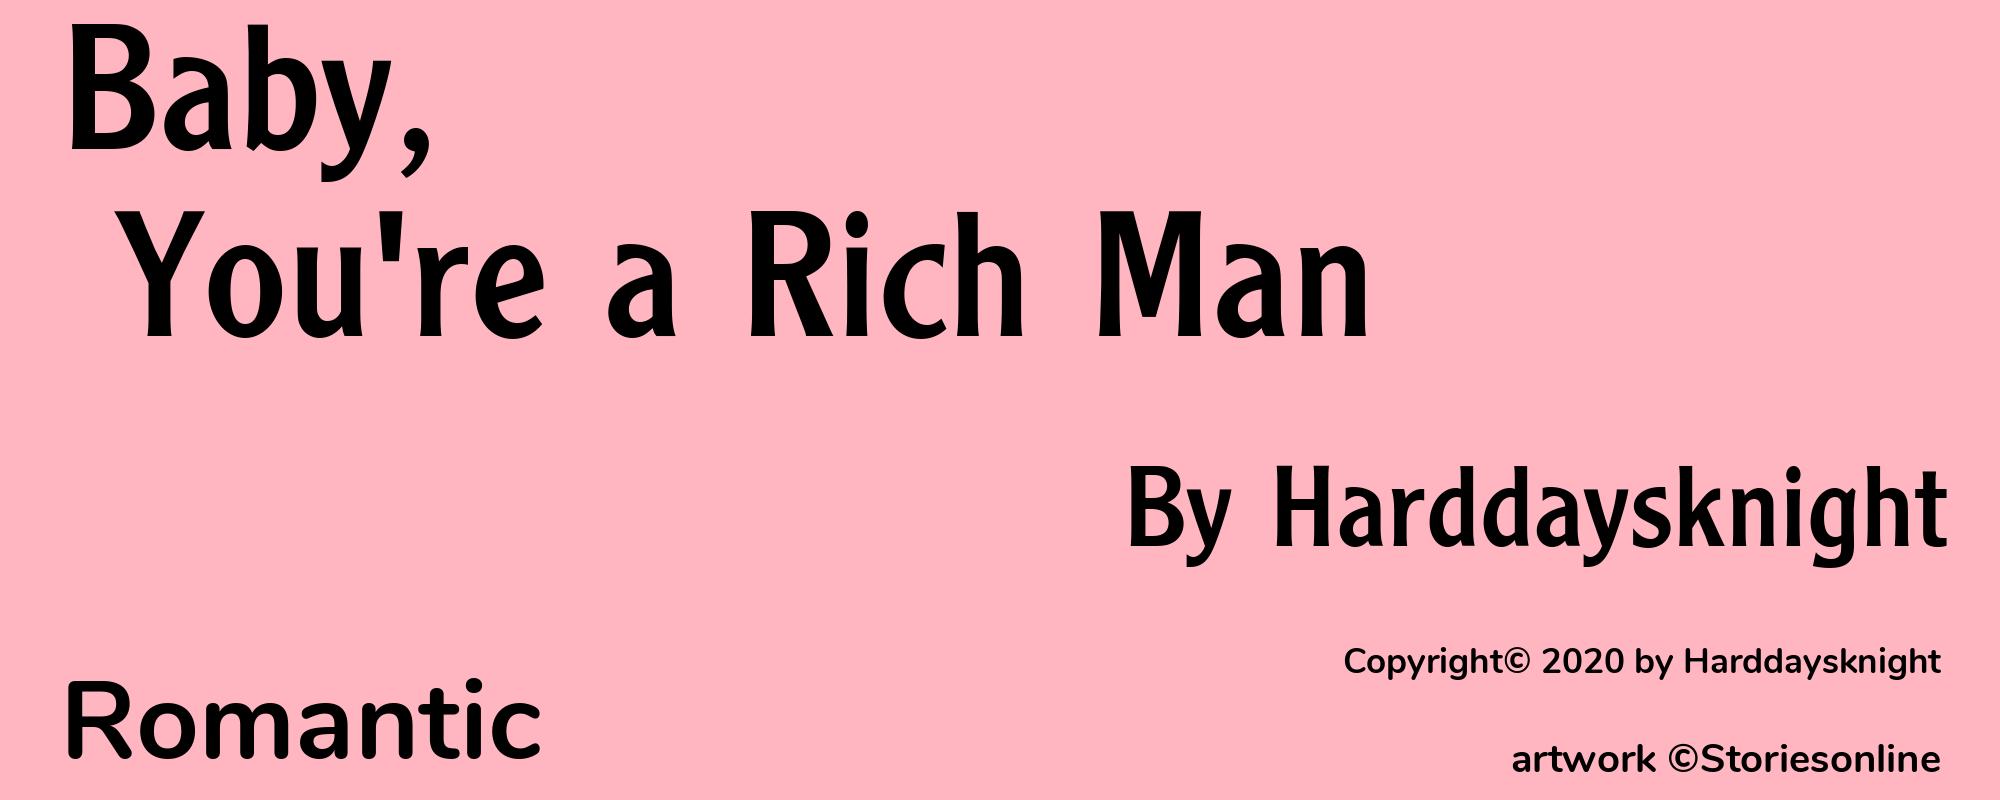 Baby, You're a Rich Man - Cover